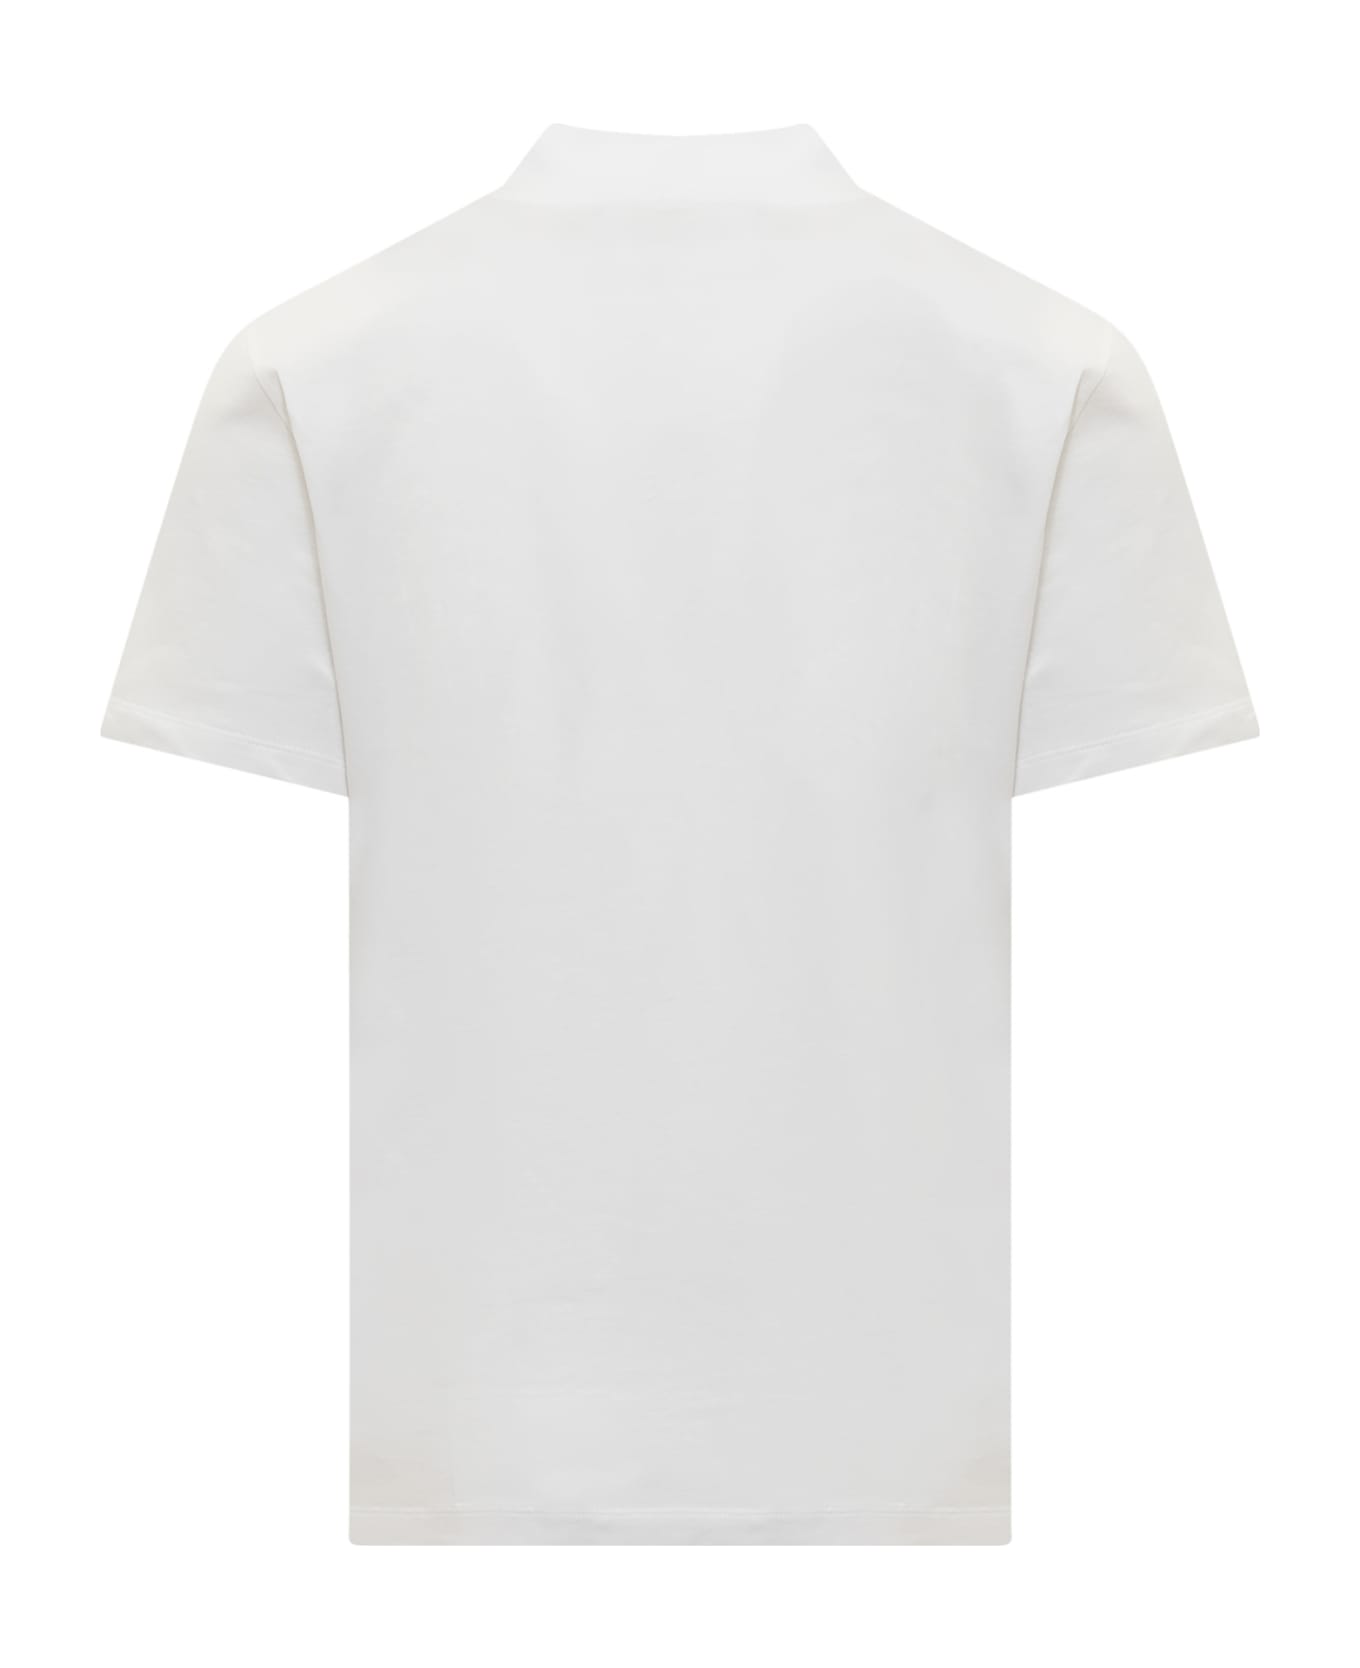 Fred Perry by Raf Simons Fred Perry X Raf Simons T-shirt With Pins - WHITE シャツ